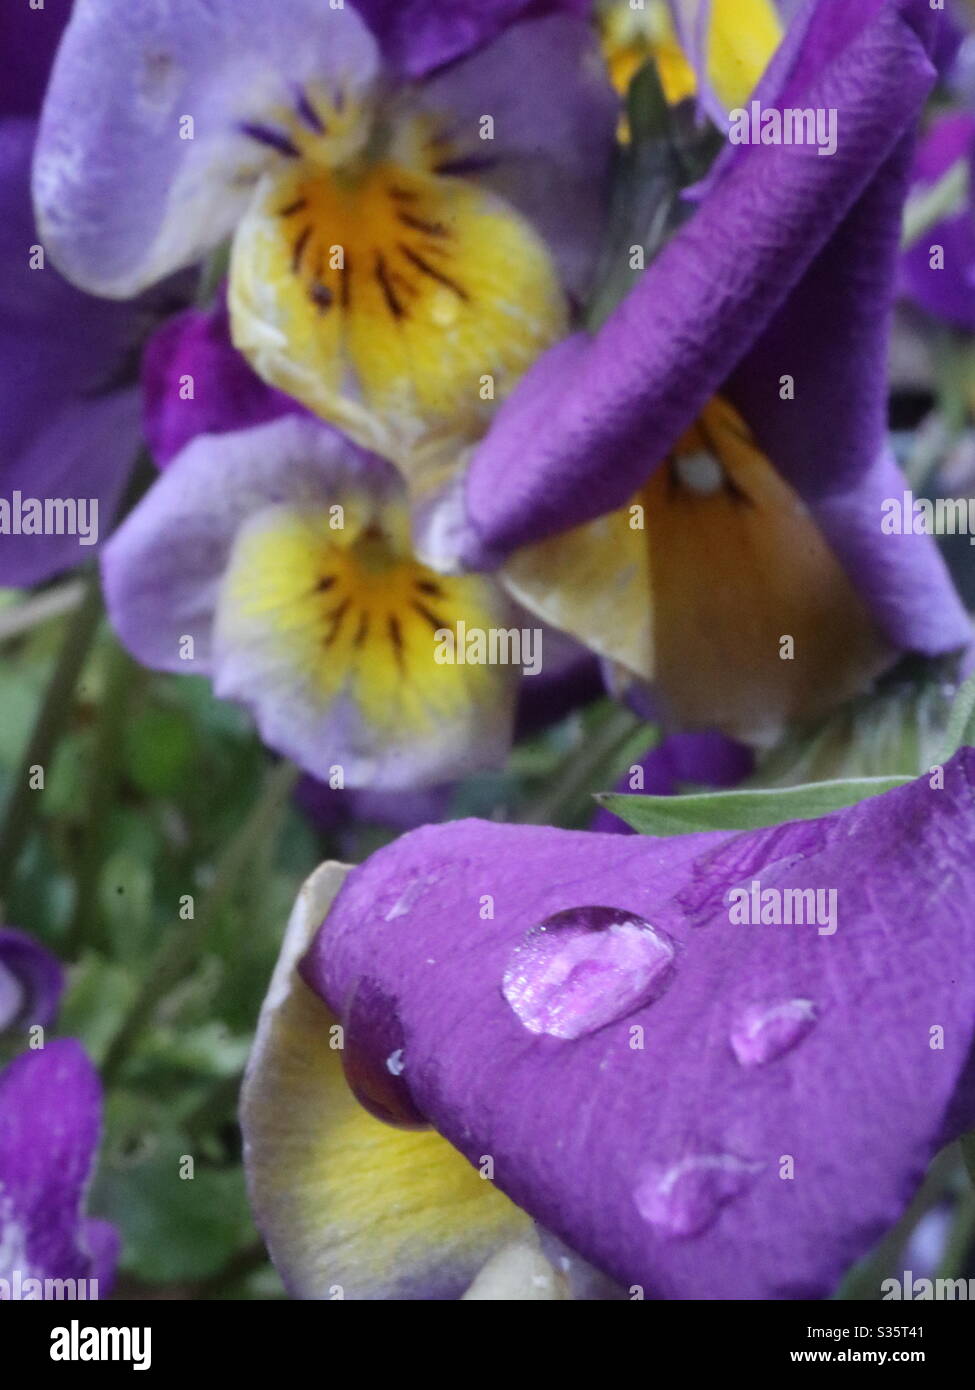 Pansies in April showers Stock Photo